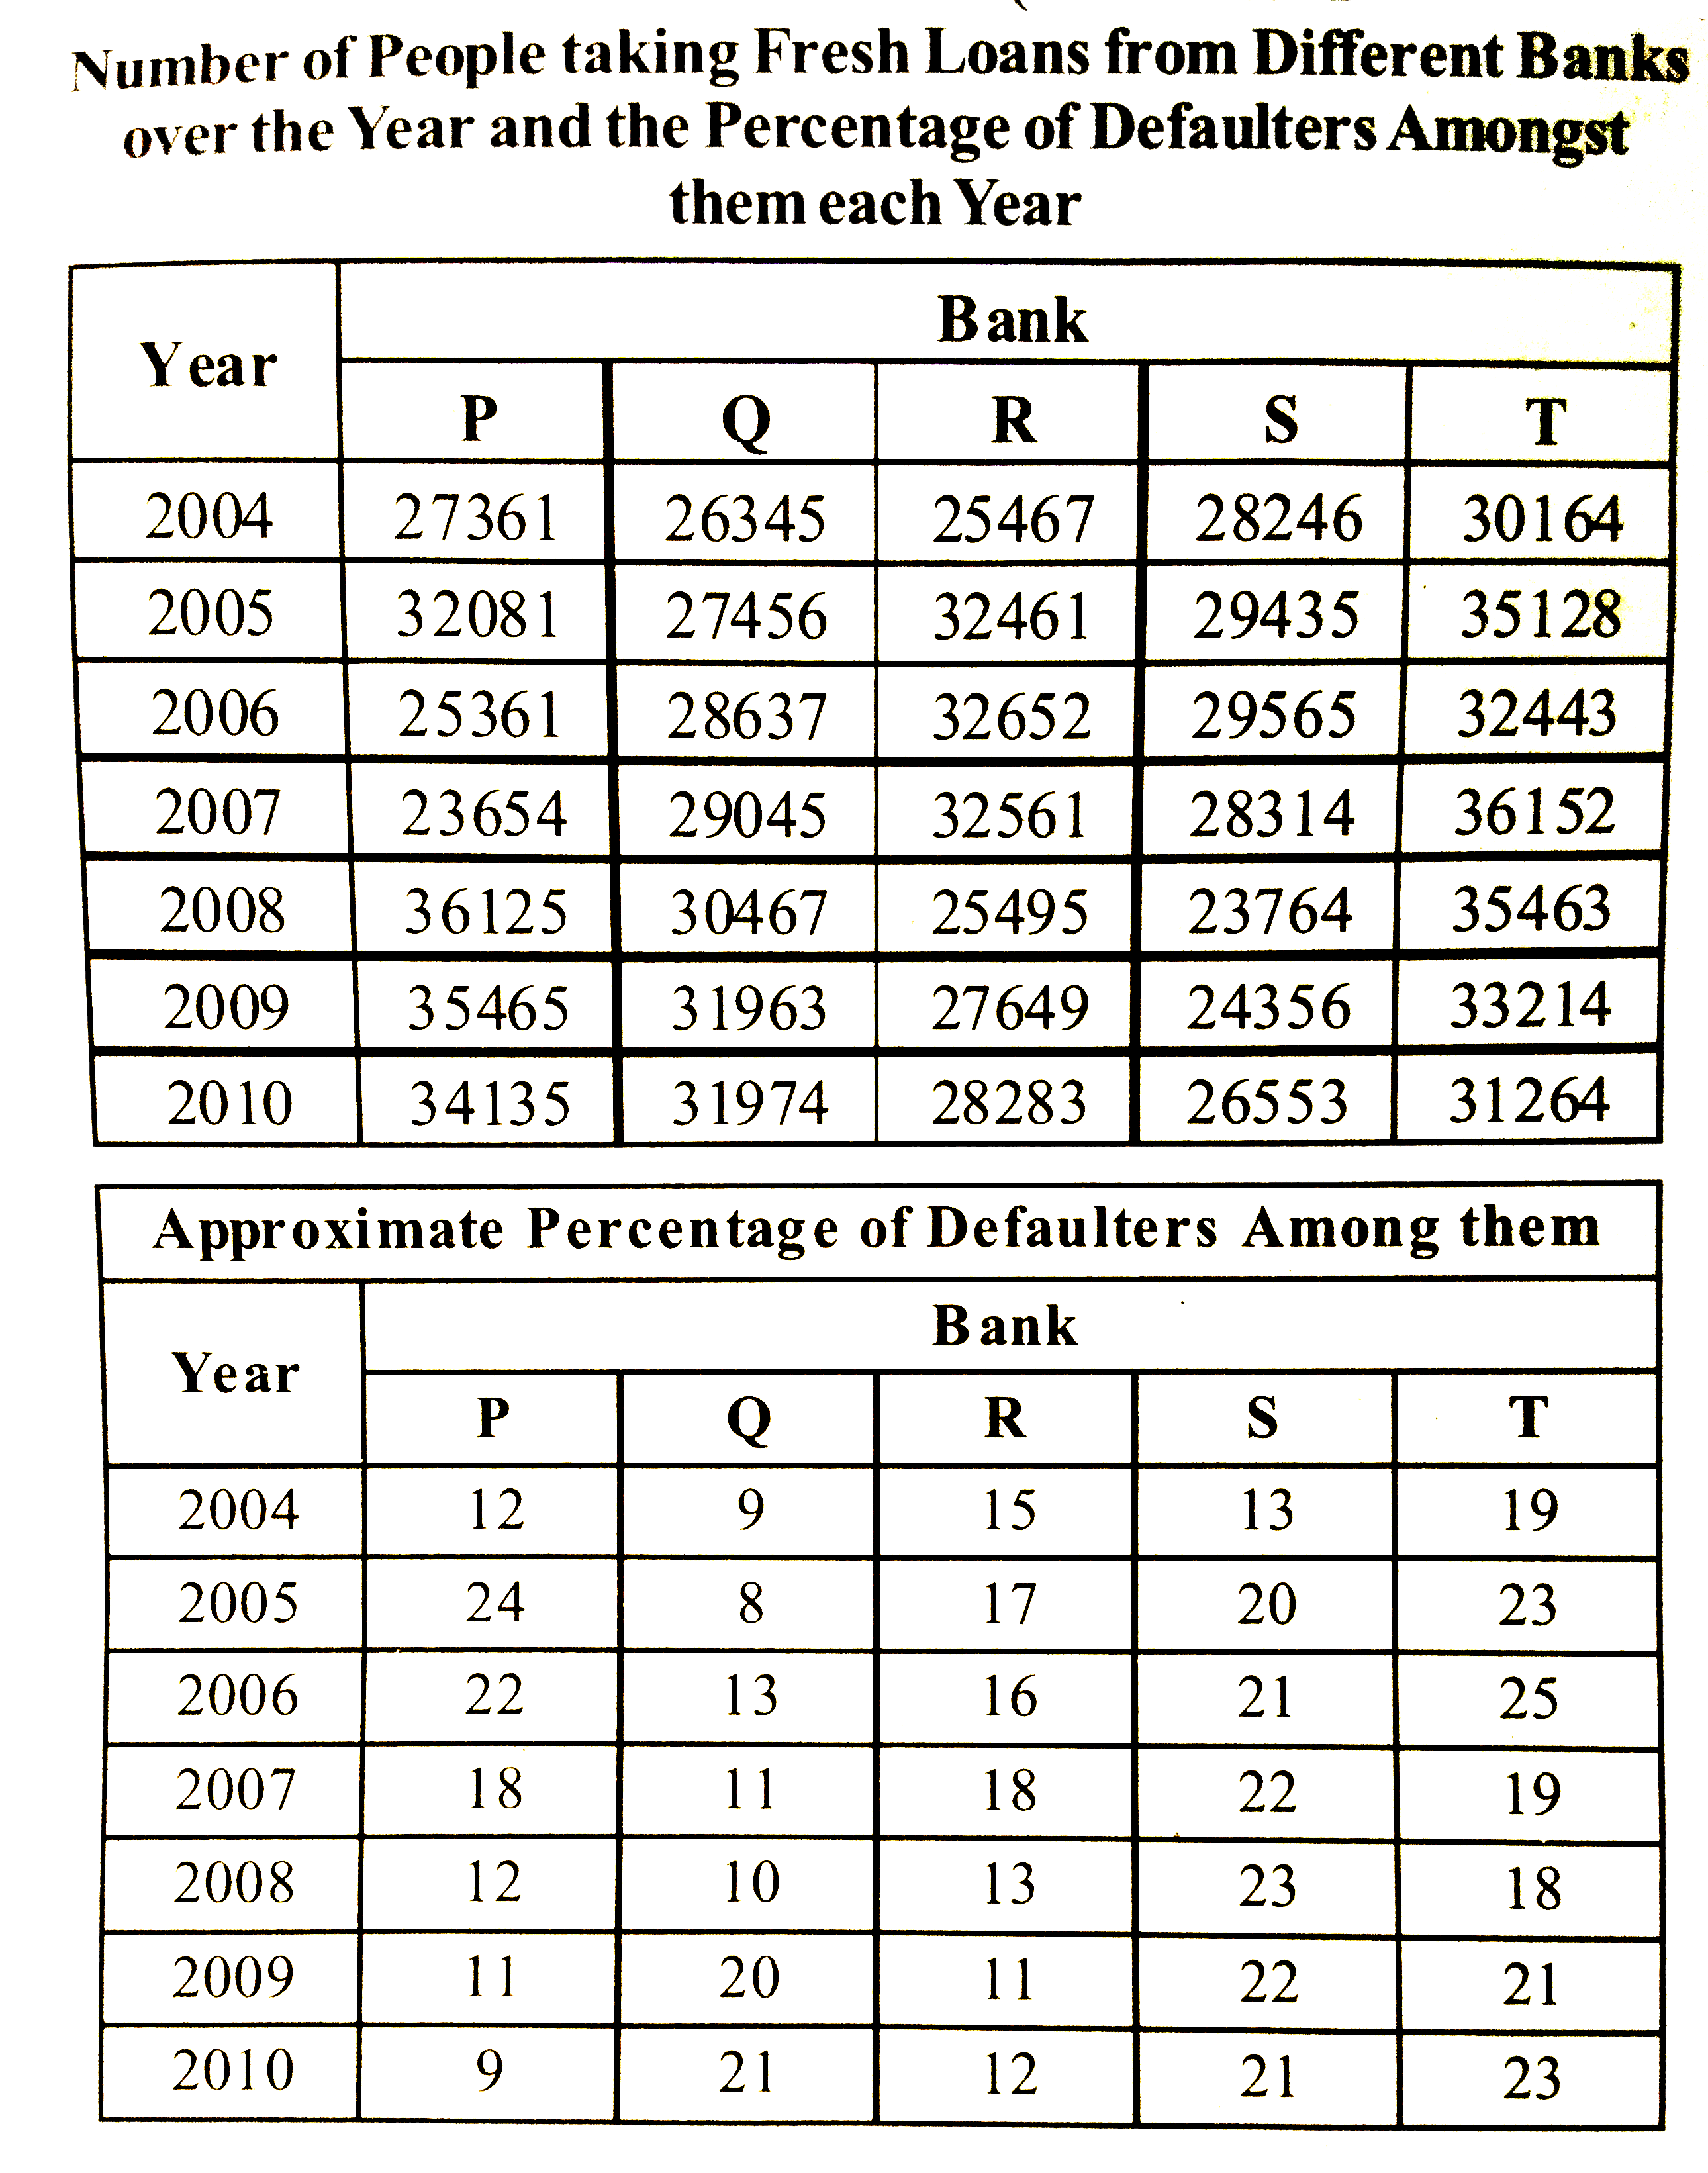 Approximately how many people taking a loan from Banks S in the year 2006 were defaulters ?